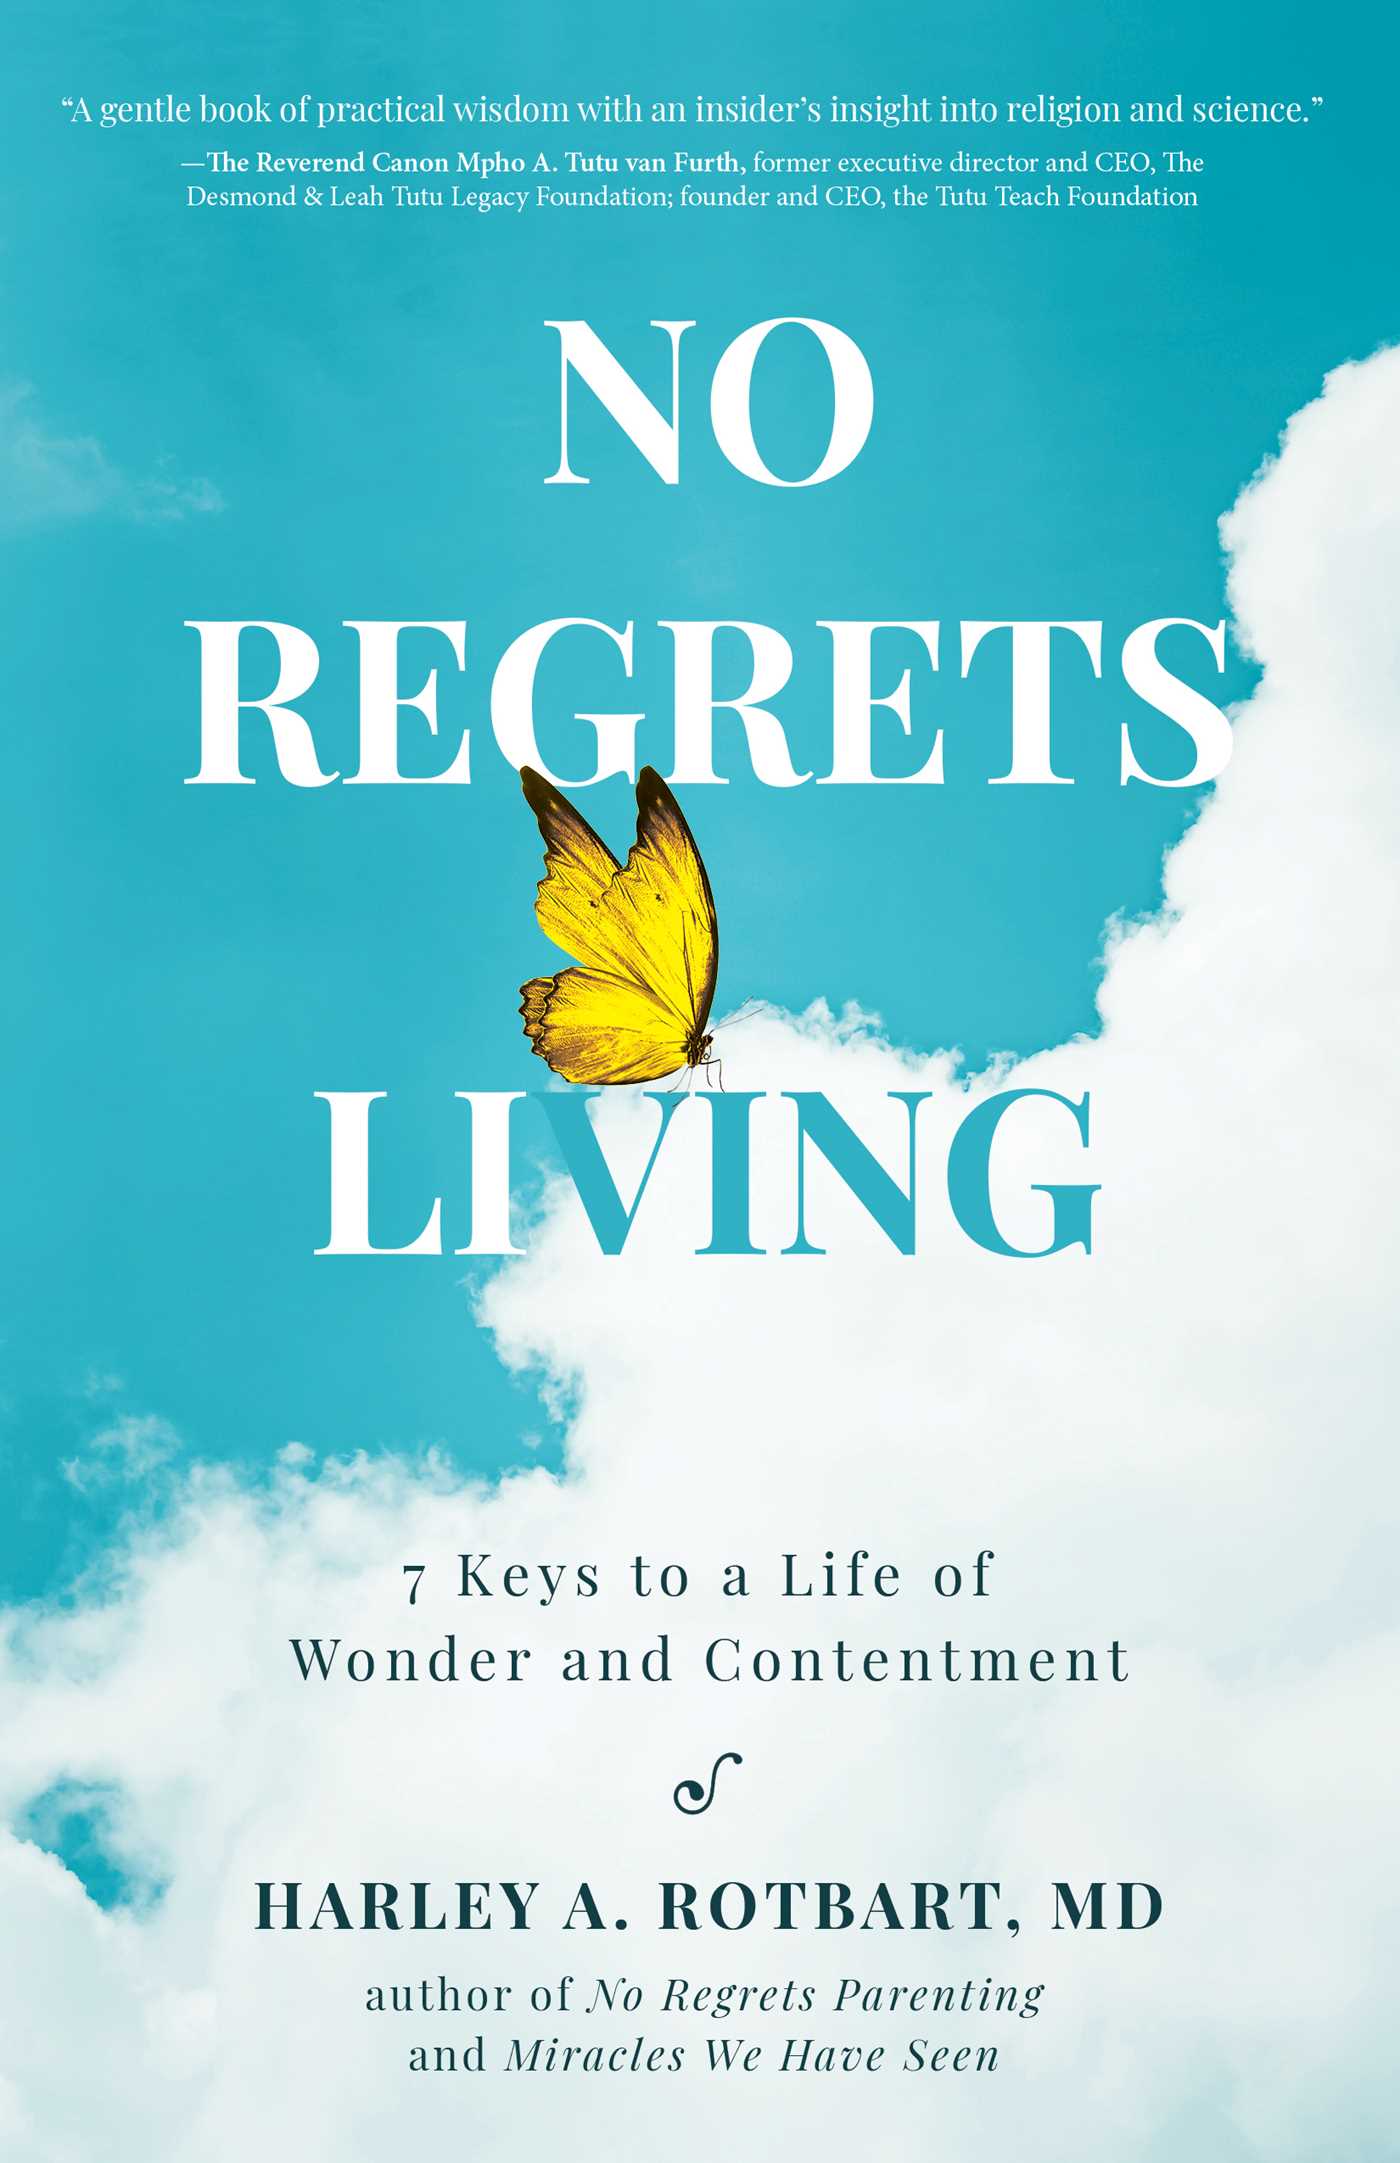 No Regrets Living : 7 Keys to a Life of Wonder and Contentment | Rotbart, Harley A.